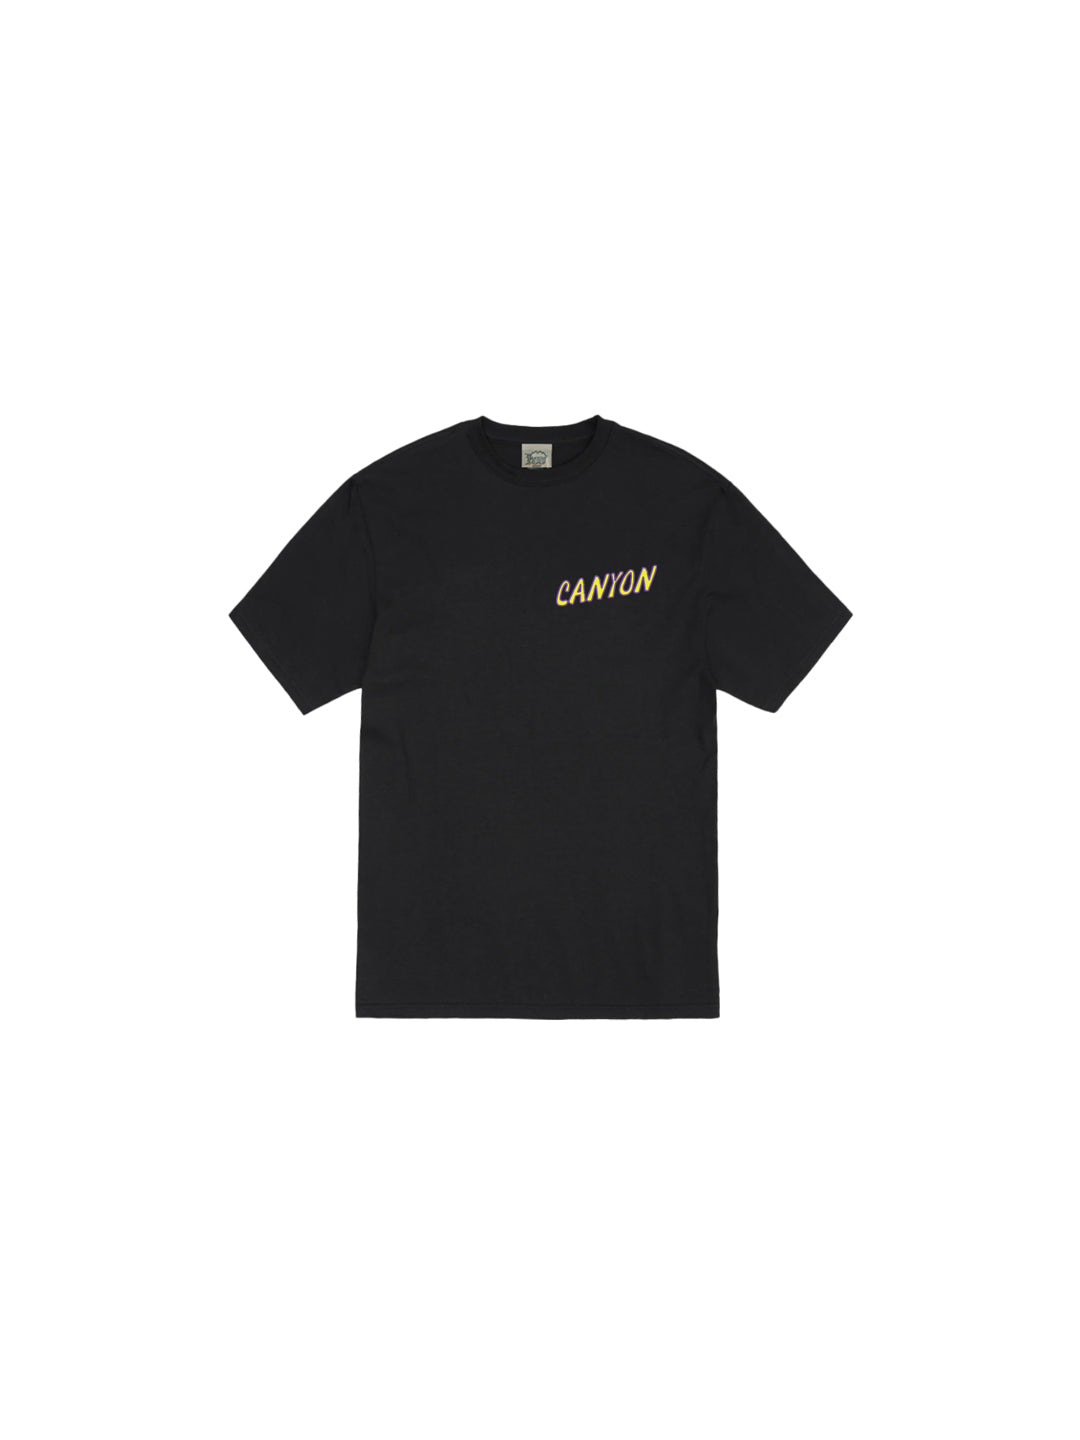 Canyon '24 Youth Tee in Charcoal